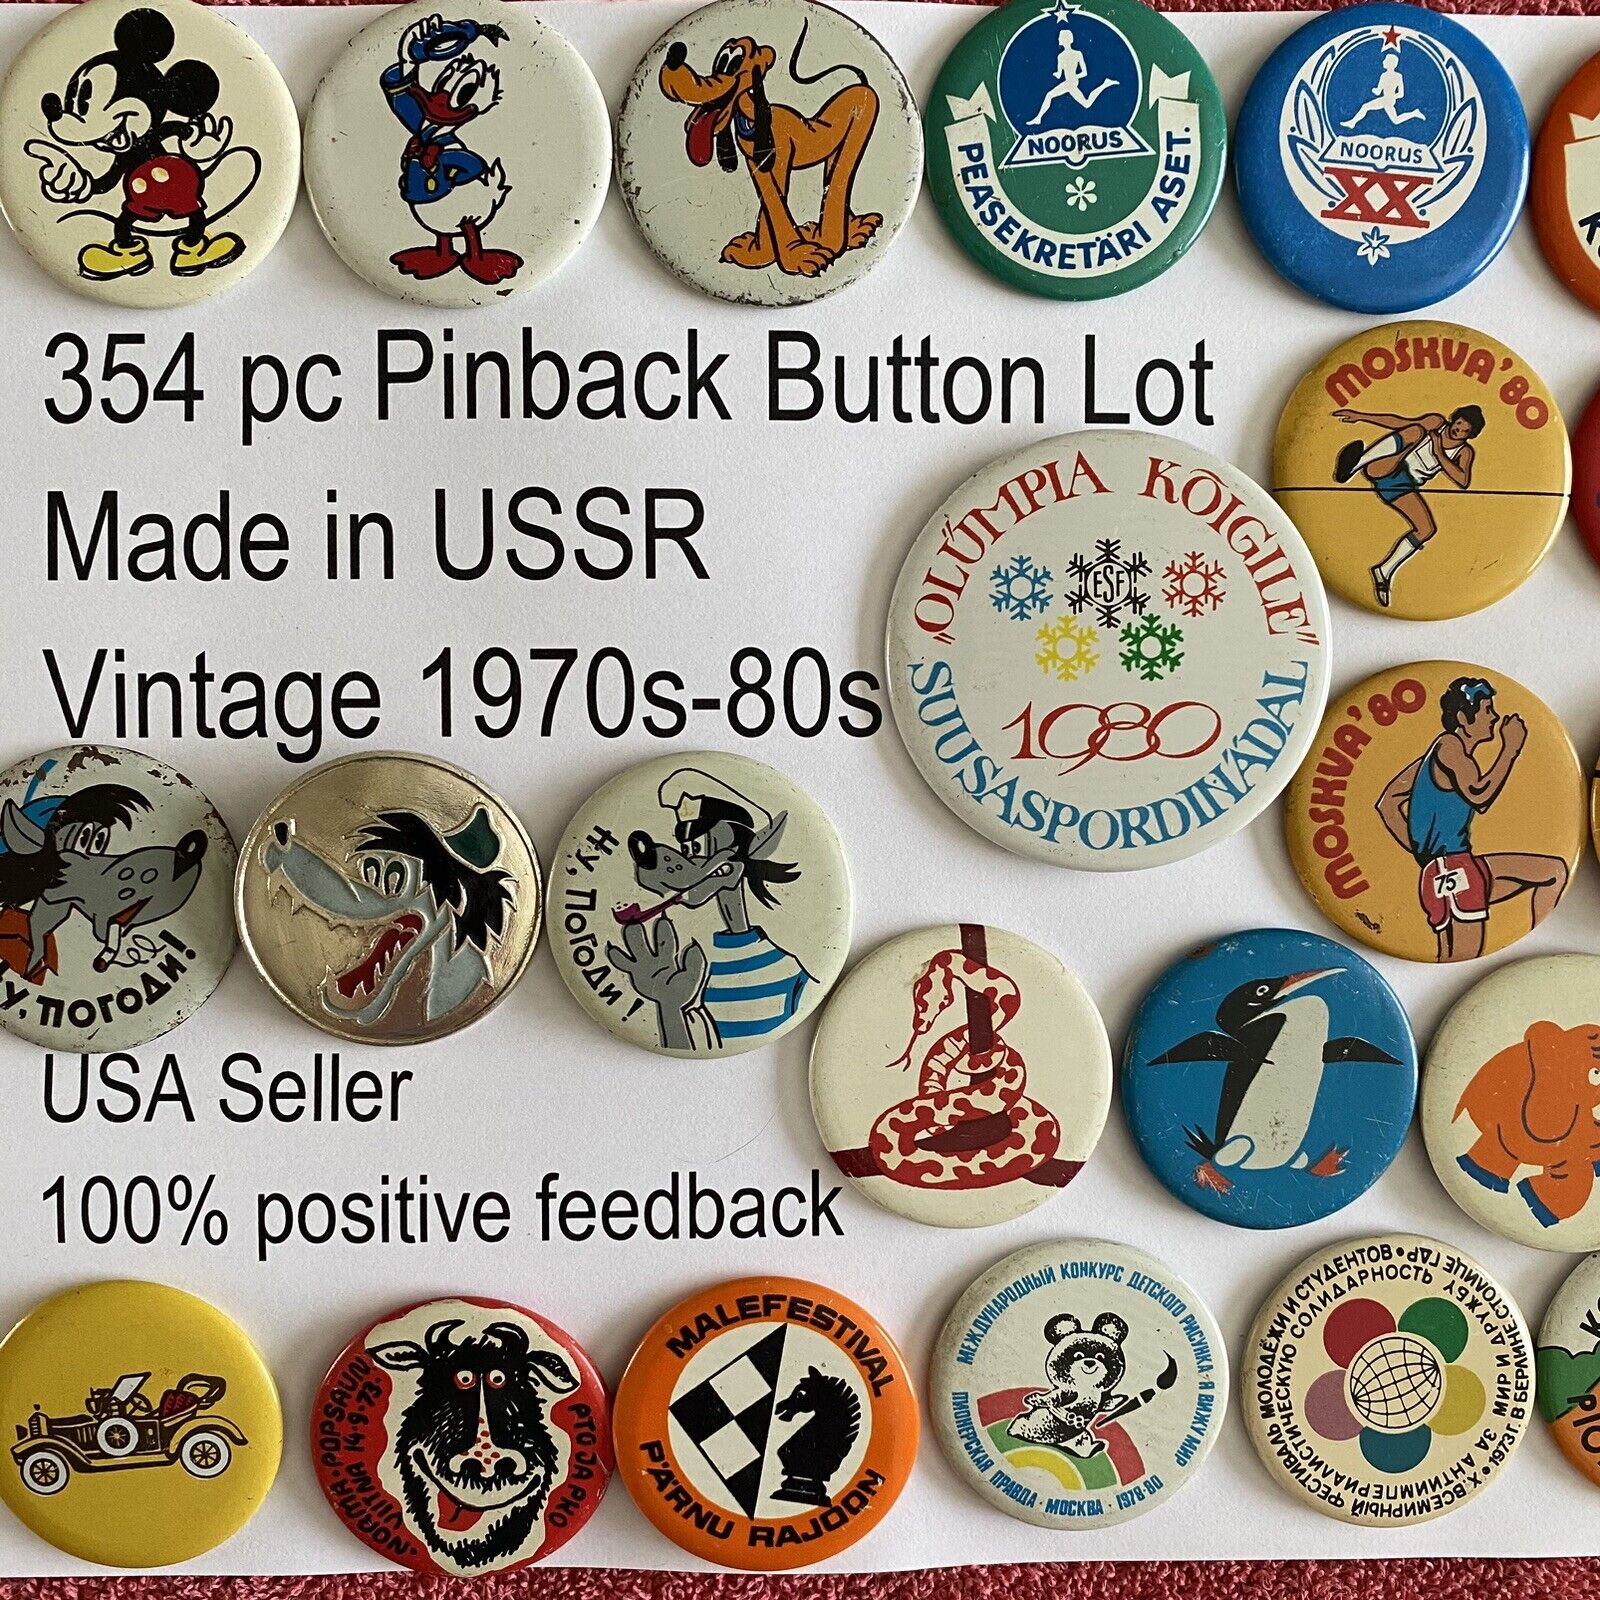 1970s 1980s Button Collection, Made in USSR, Pinback Button Lot, 1980 Olympics